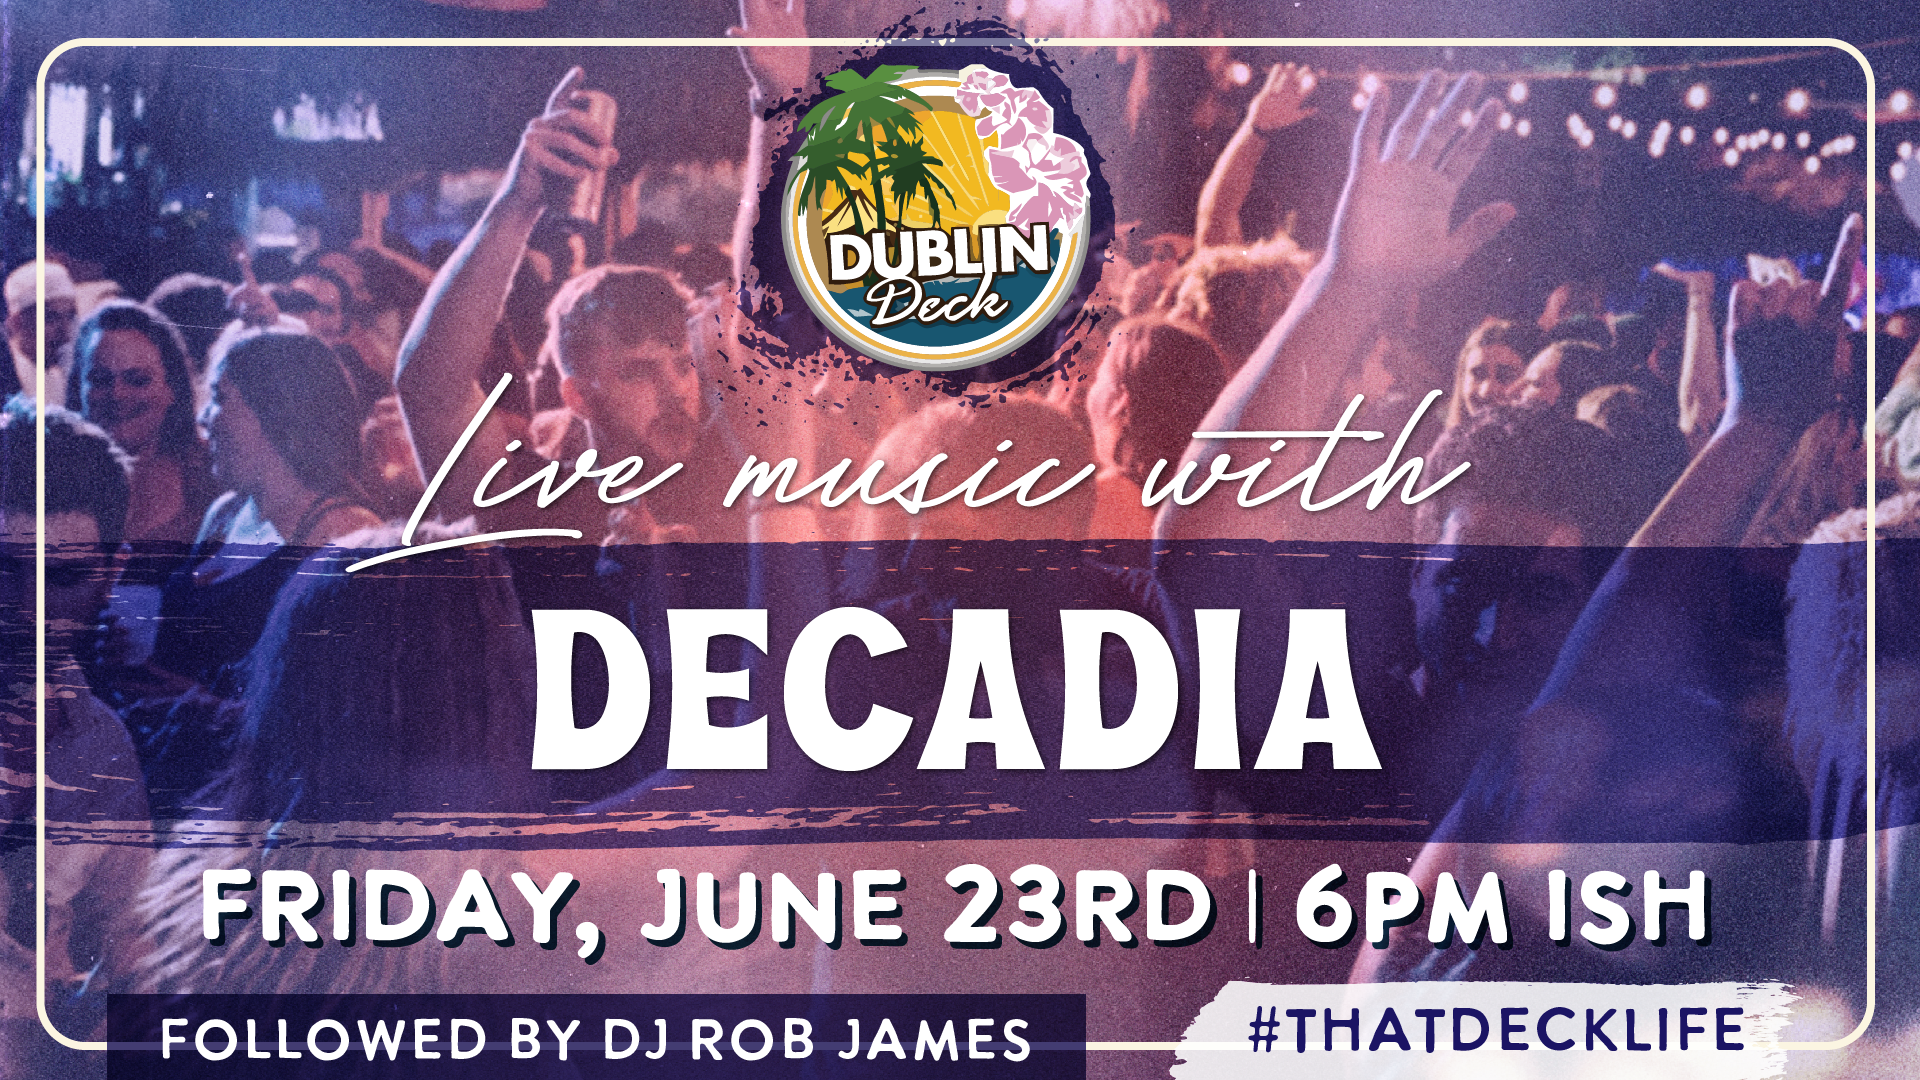 Jumpstart the weekend with the sounds of Decadia at Dublin Deck! Music begins at 6PMish